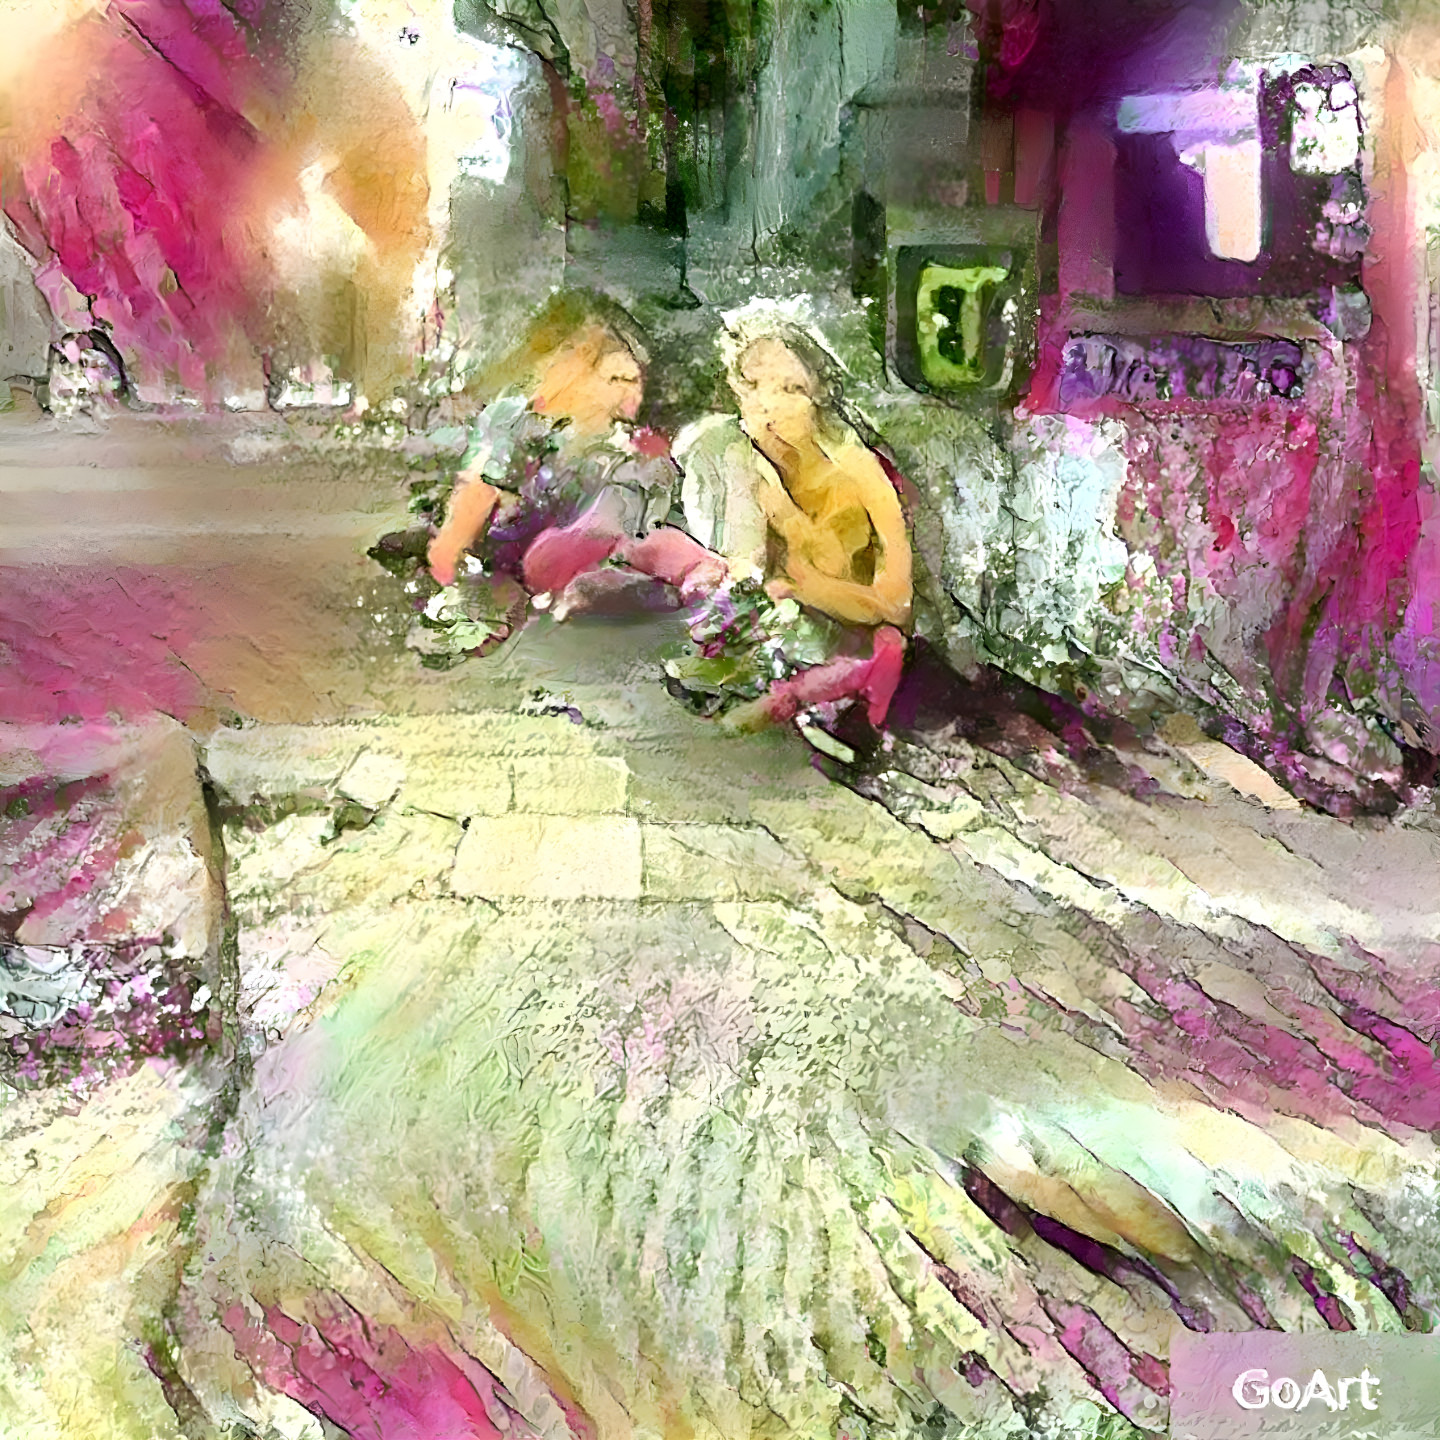 the children of the streets